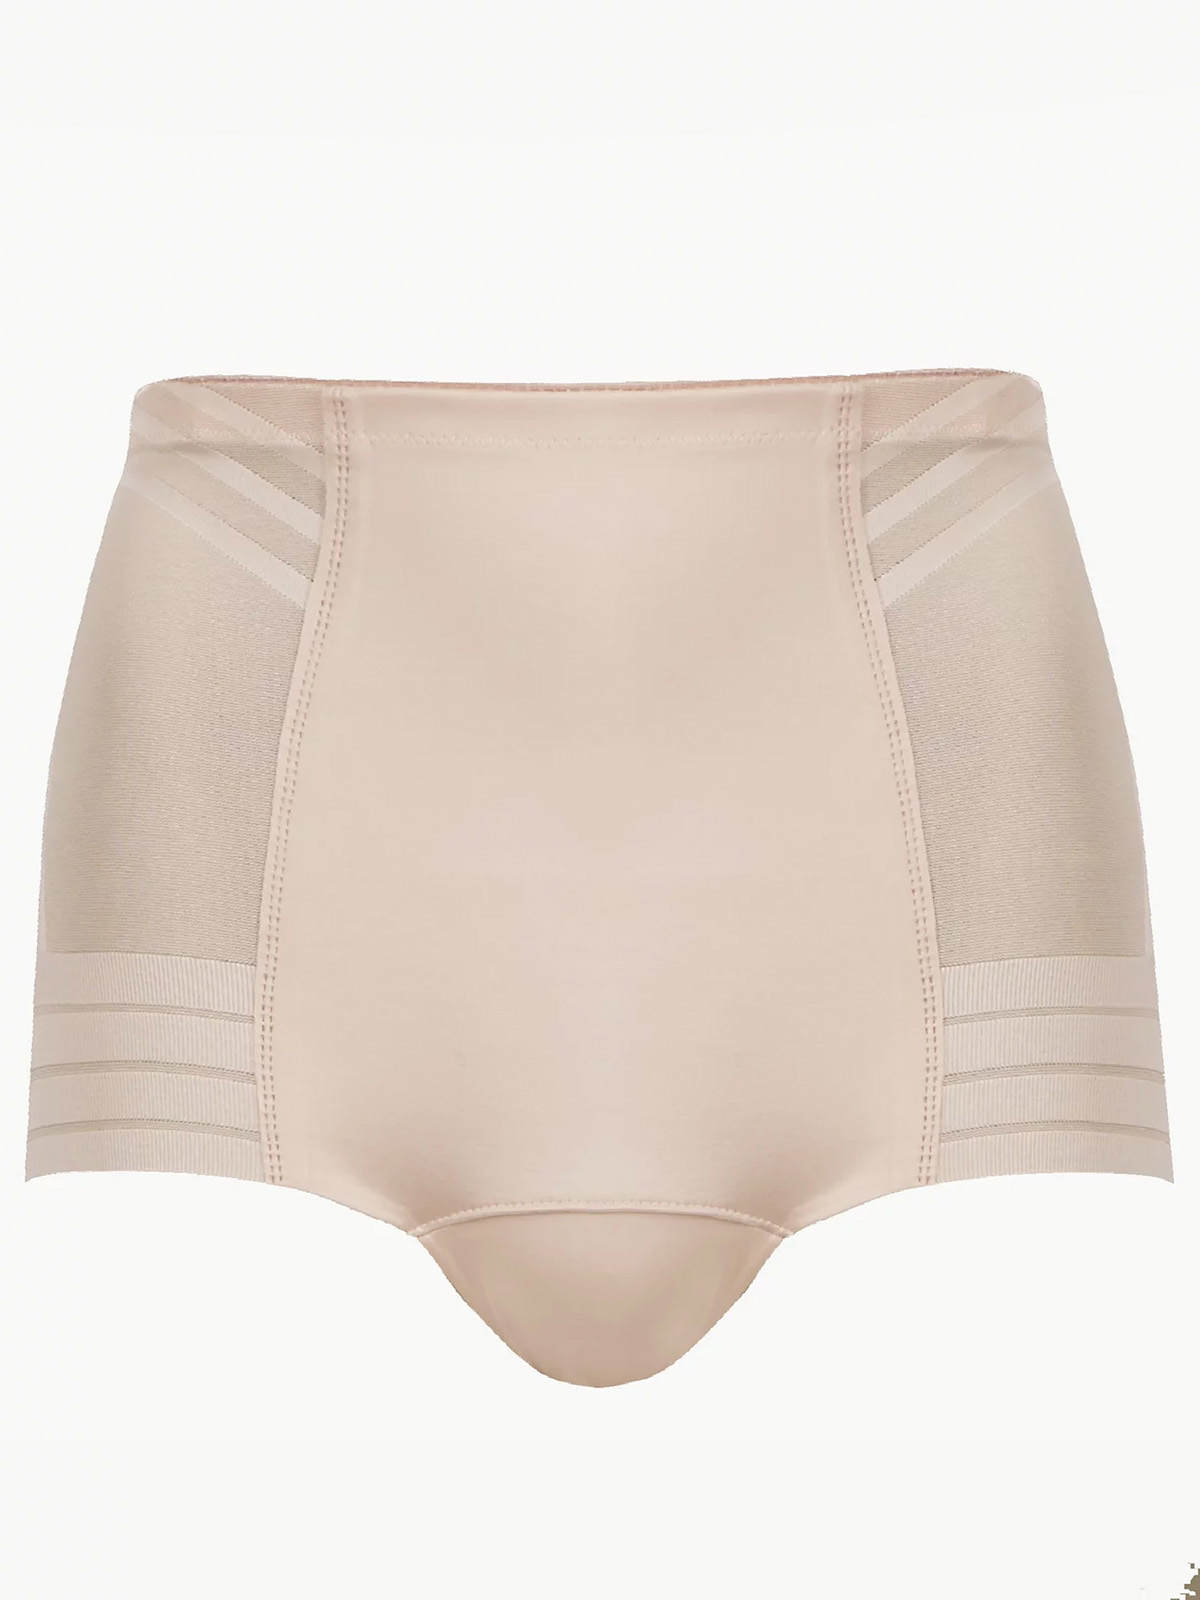 Marks and Spencer - - M&5 ALMOND Firm Control Magicwear Geometric Low ...